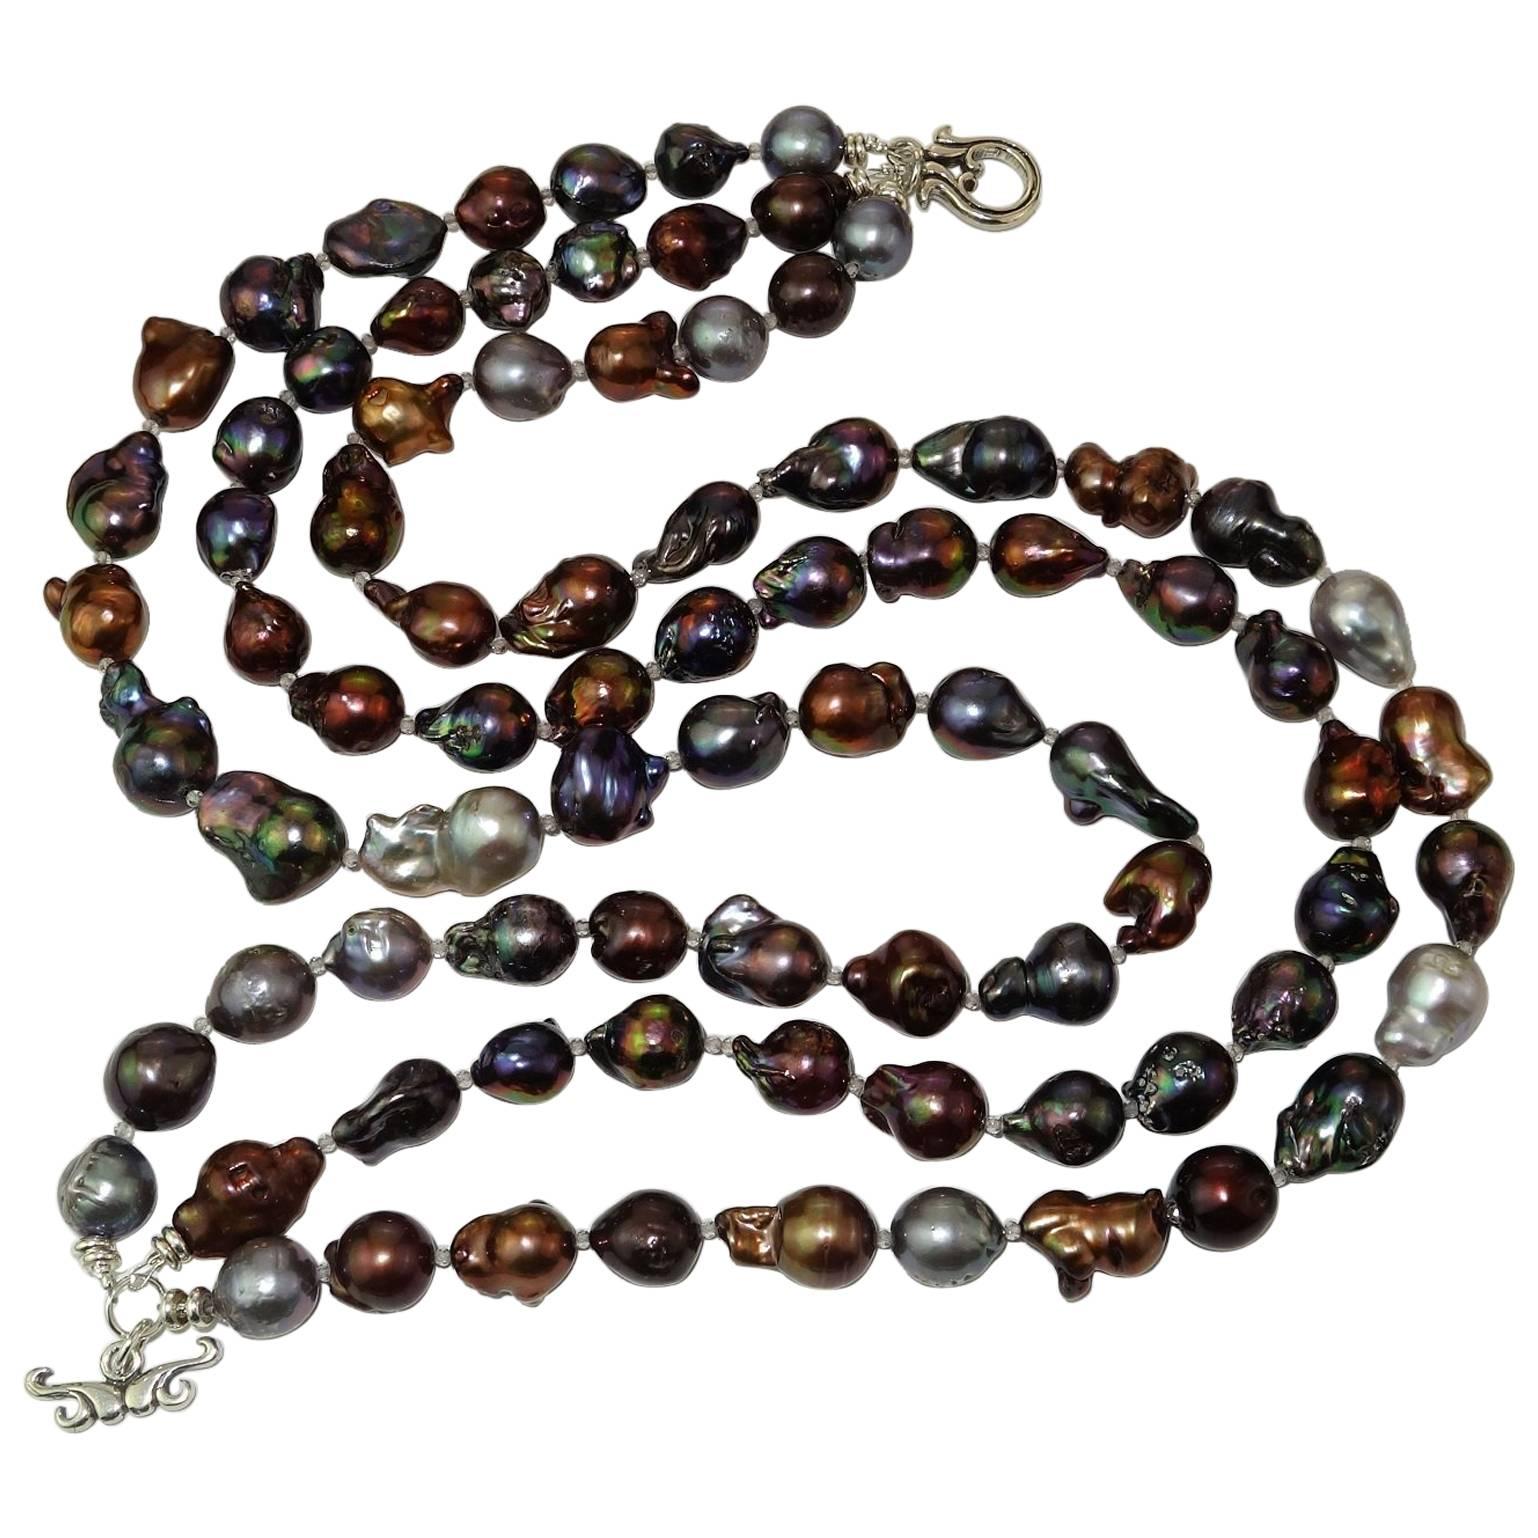 Custom made triple strand necklace of rich multi color Baroque pearls spaced with sparkling silver topaz accents. The baroque pearls range in color from gold to gray, mauve, bronze, and aubergine. The Baroque pearls have an interesting variety of